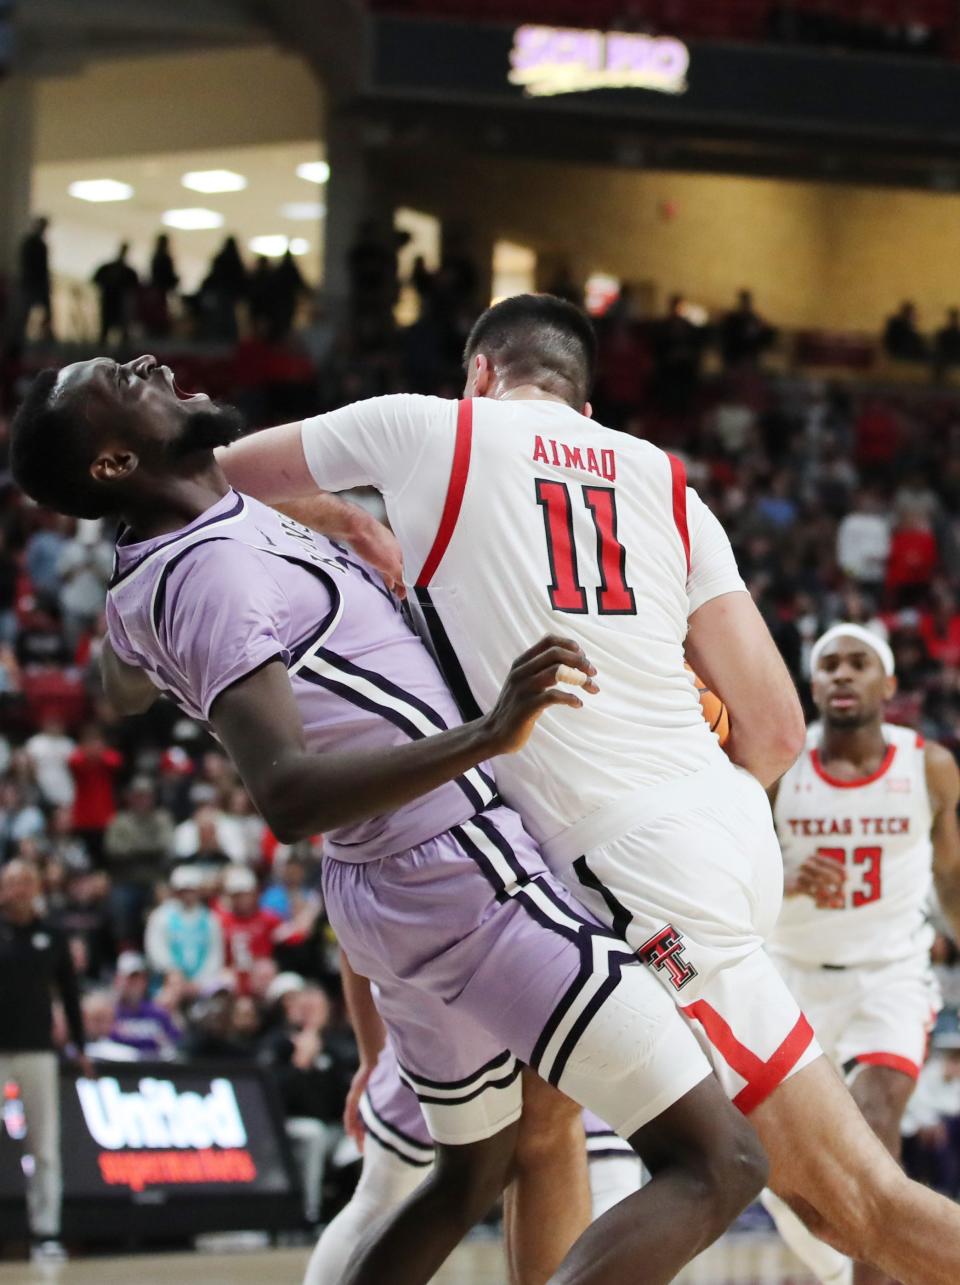 Kansas State center Abayomi Iyiola (23) draws a charging foul against Texas Tech's Fardaws Aimaq (11) during Saturday's game at United Supermarkets Arena in Lubbock, Texas.